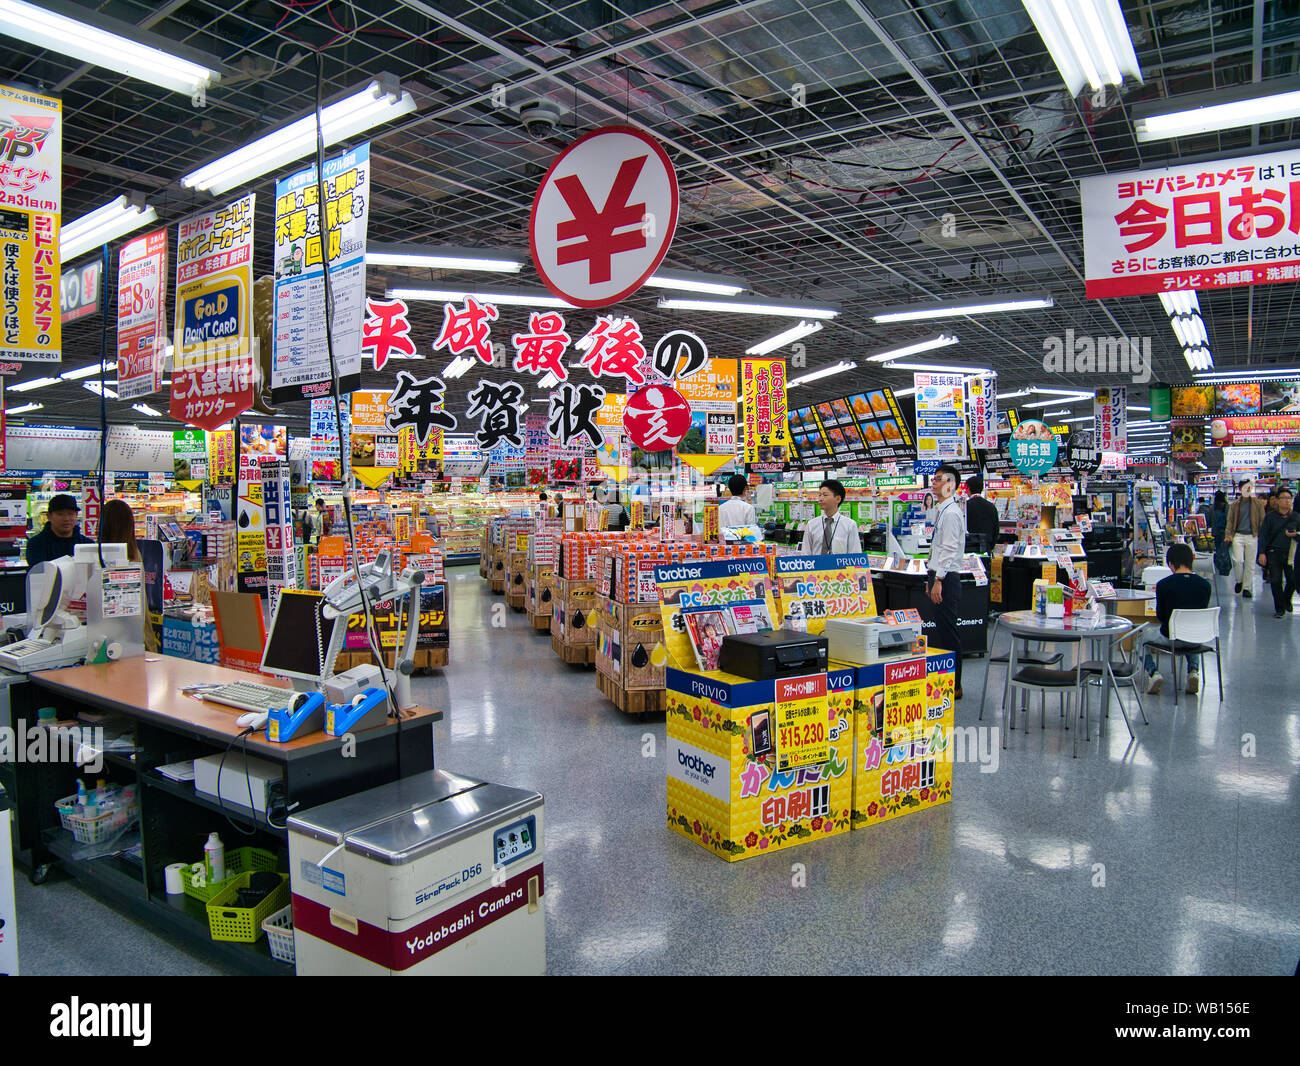 The interior or inside of a Japanese store, selling technology items in Kyoto, Japan. Many store assistants are waiting to serve customers. Stock Photo